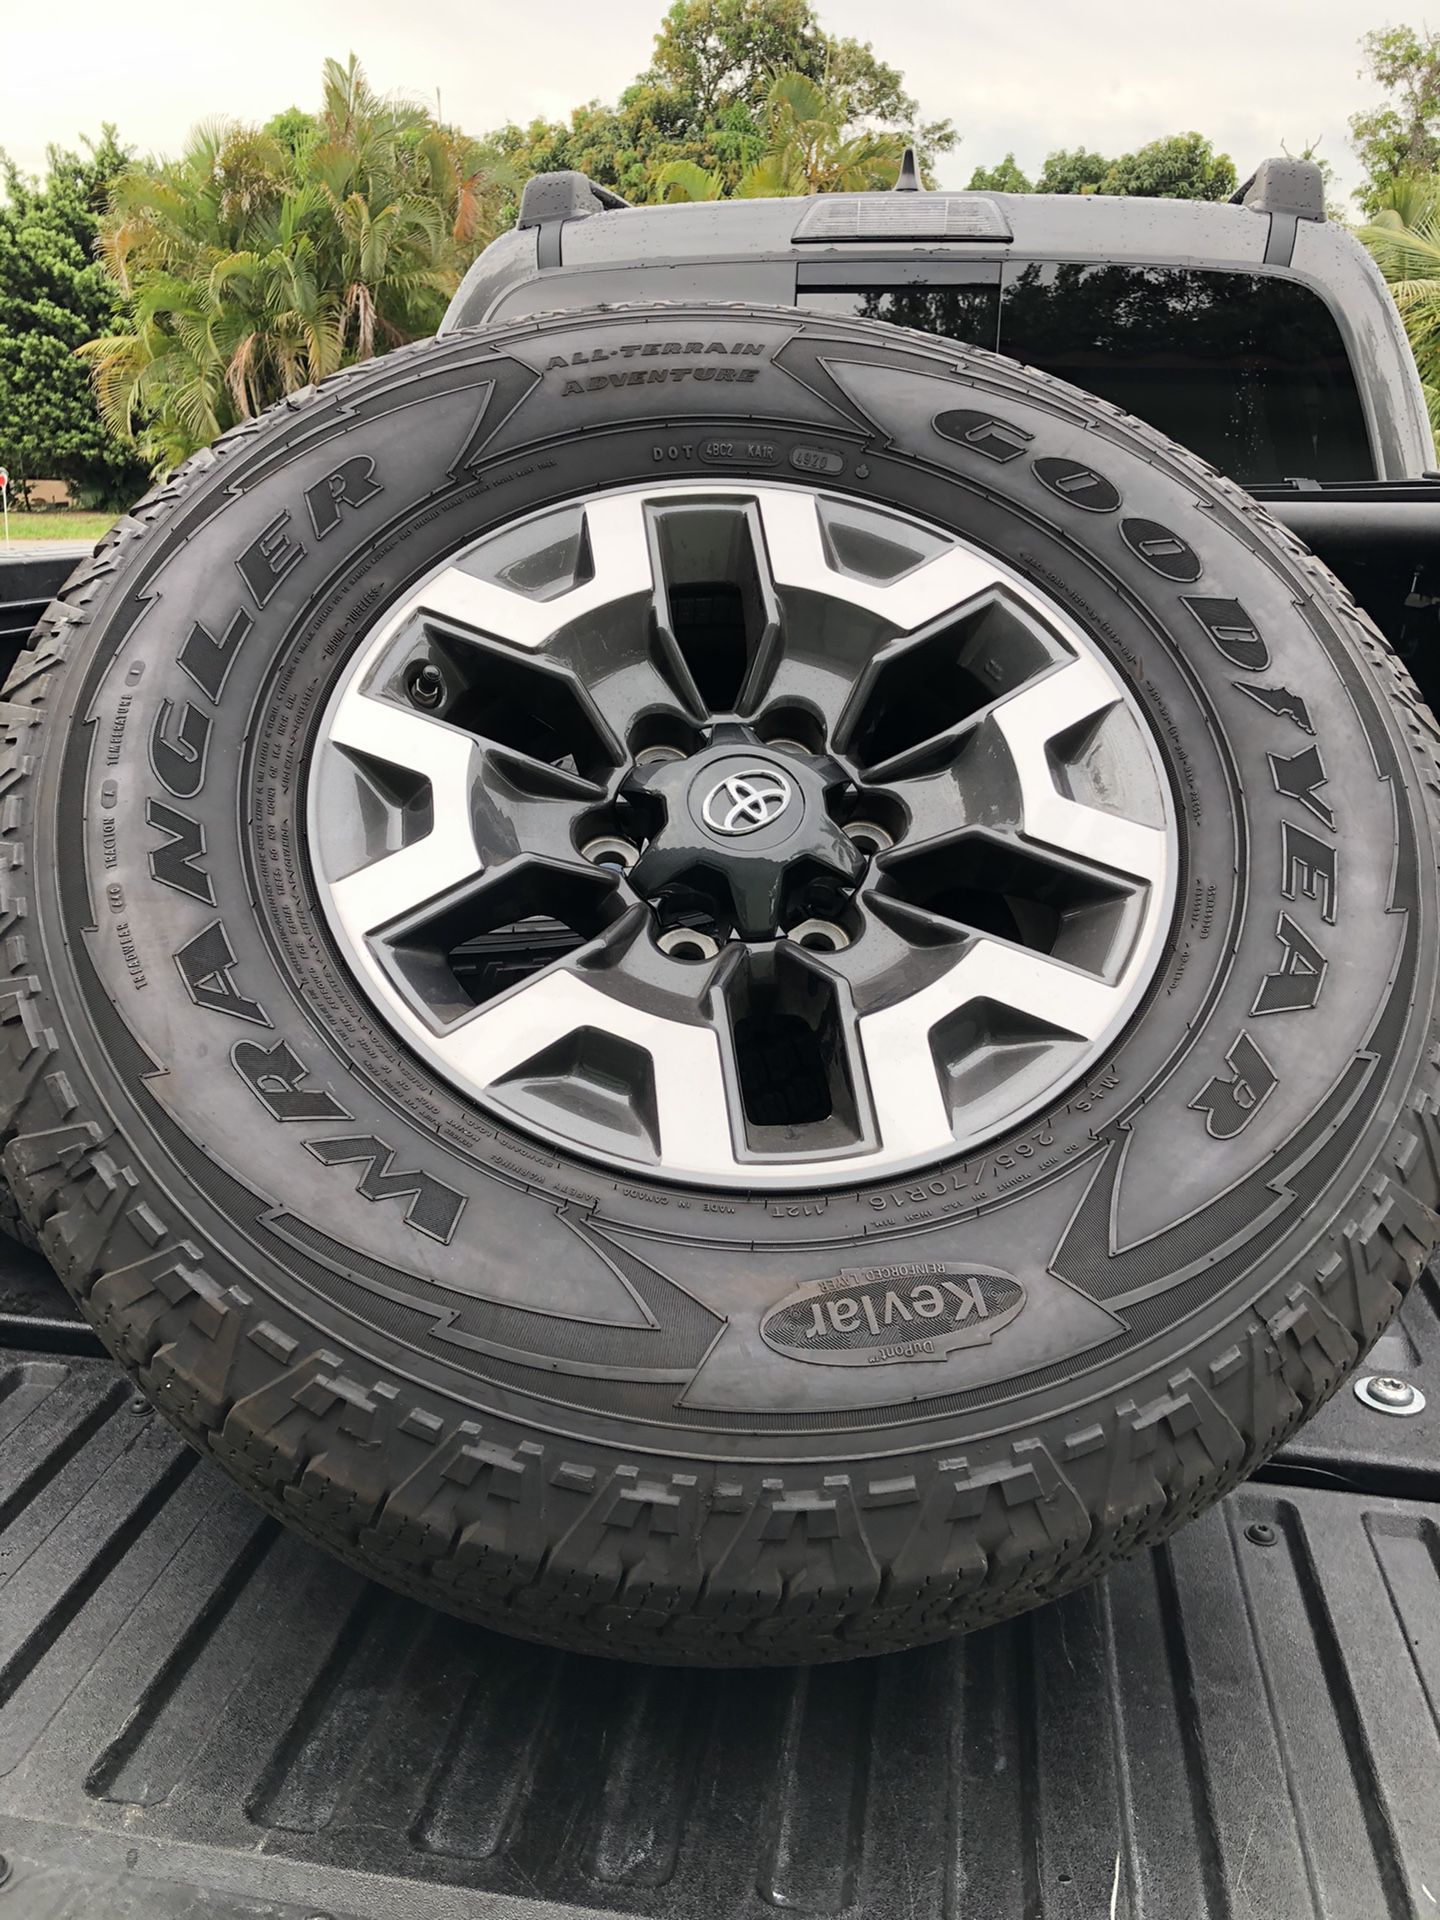 2021 Toyota Tacoma TRD Off-Road OEM Wheels/Rims With 265/70R16 Goodyear  Wrangler All-Terrian Adventure Kevlar Tires for Sale in North Miami Beach,  FL - OfferUp